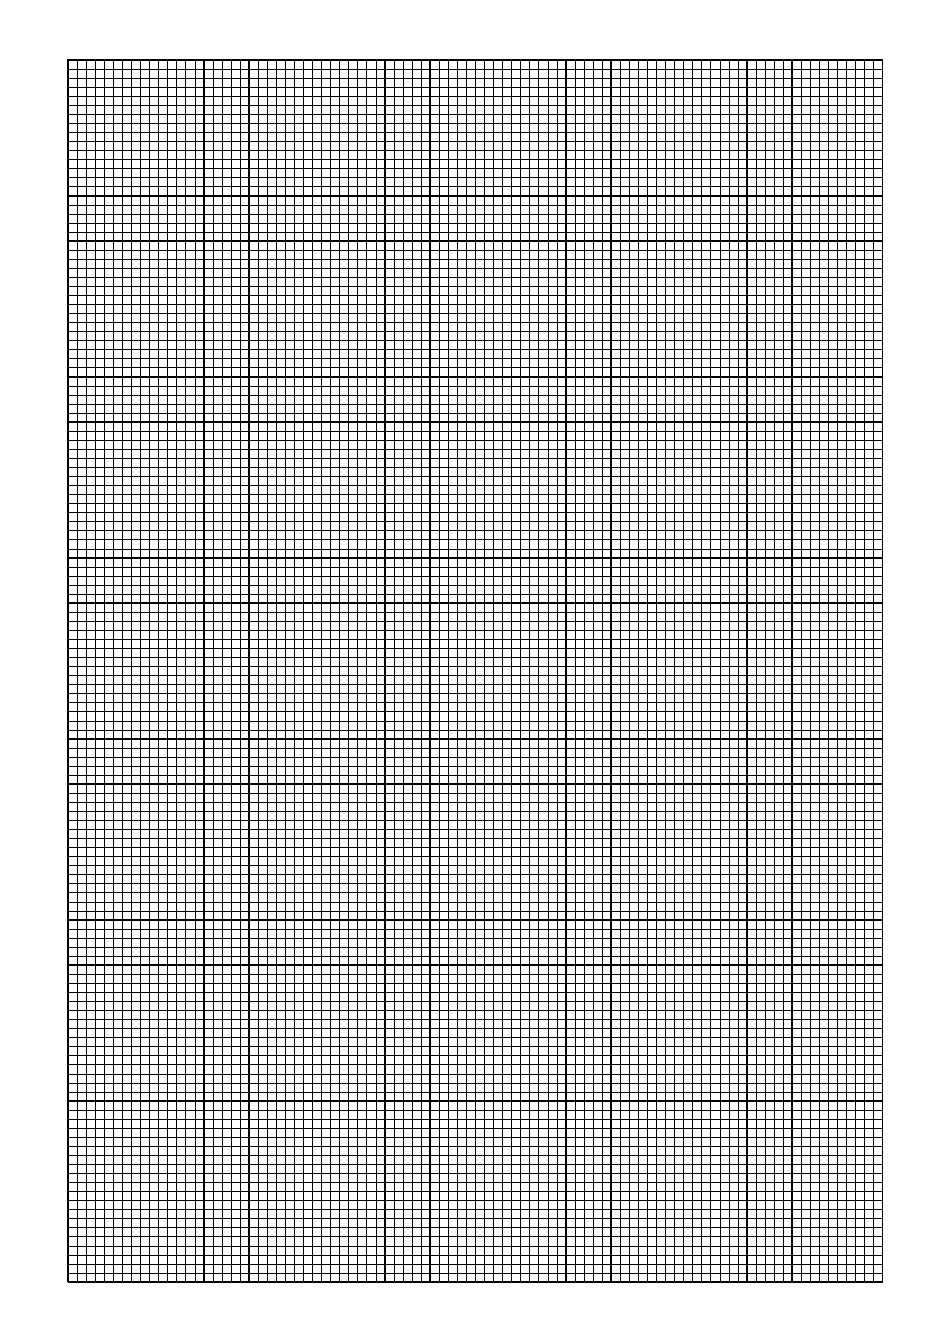 Black 2mm with 1cm Bold Graph Paper Template - A high-quality black graph paper template with a thickness of 2mm and bold 1cm grid pattern.